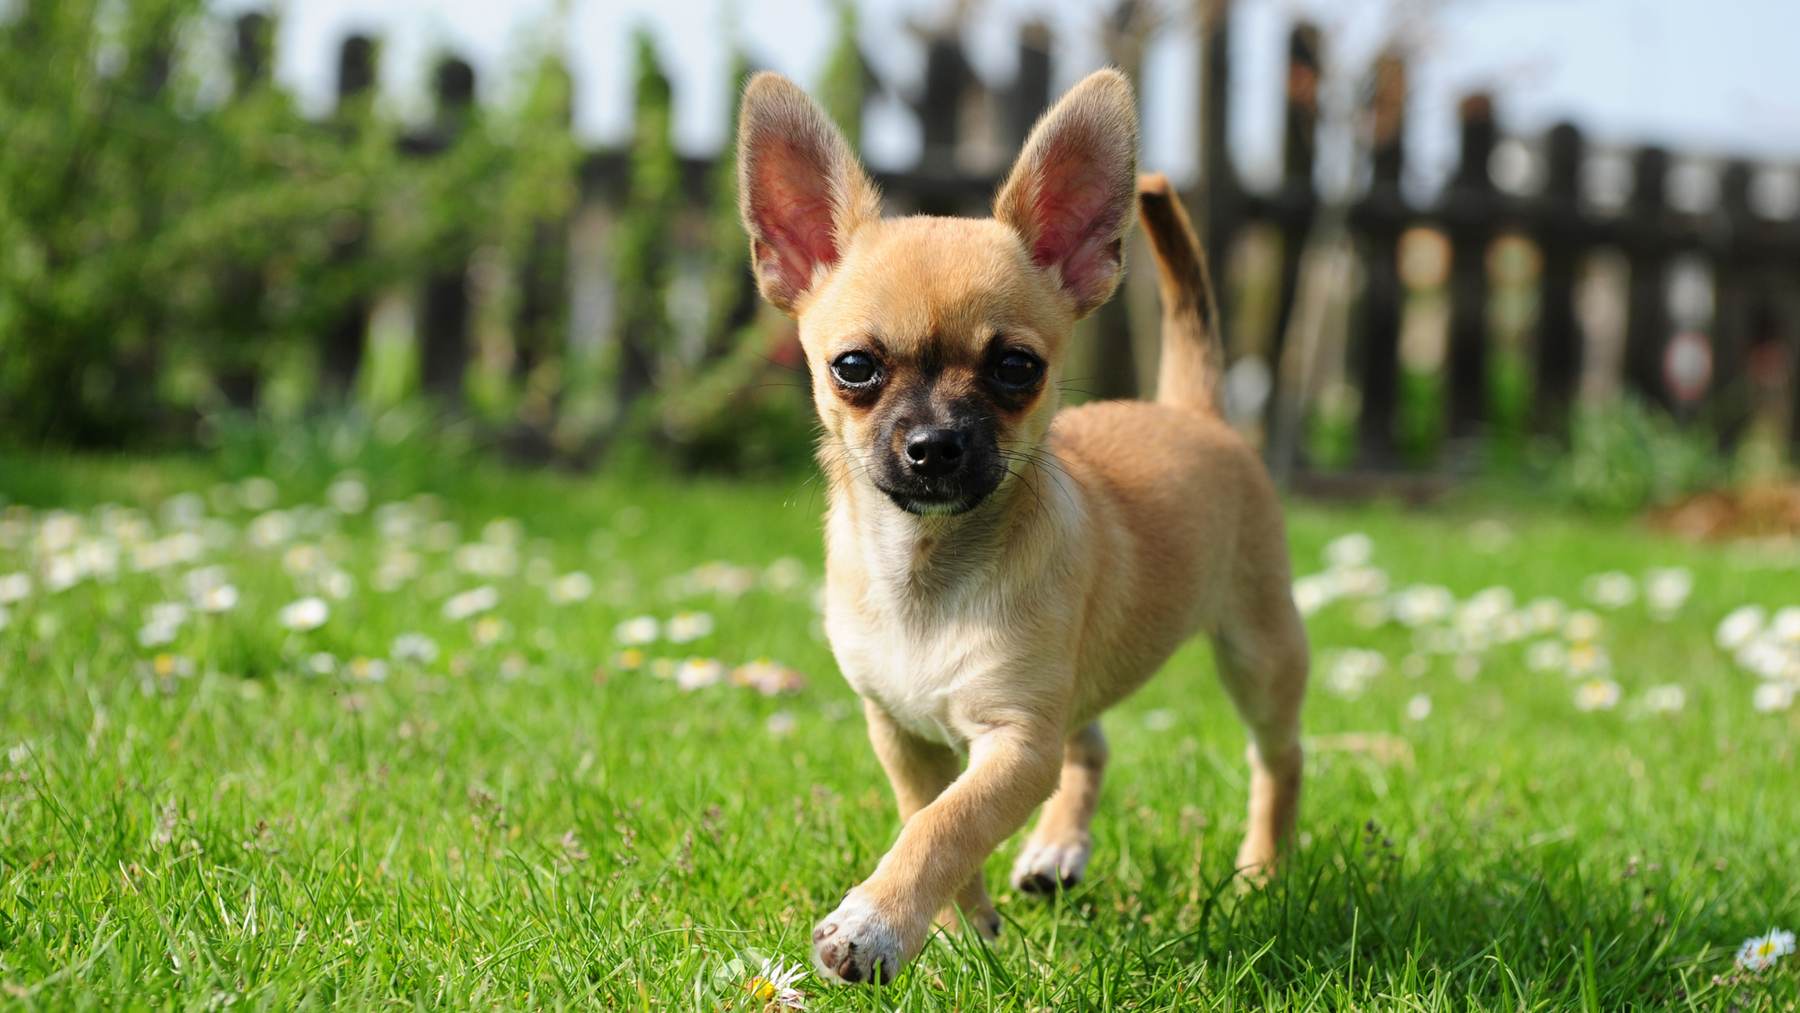 Puppy Socialization: The Key to a Well-Behaved Companion